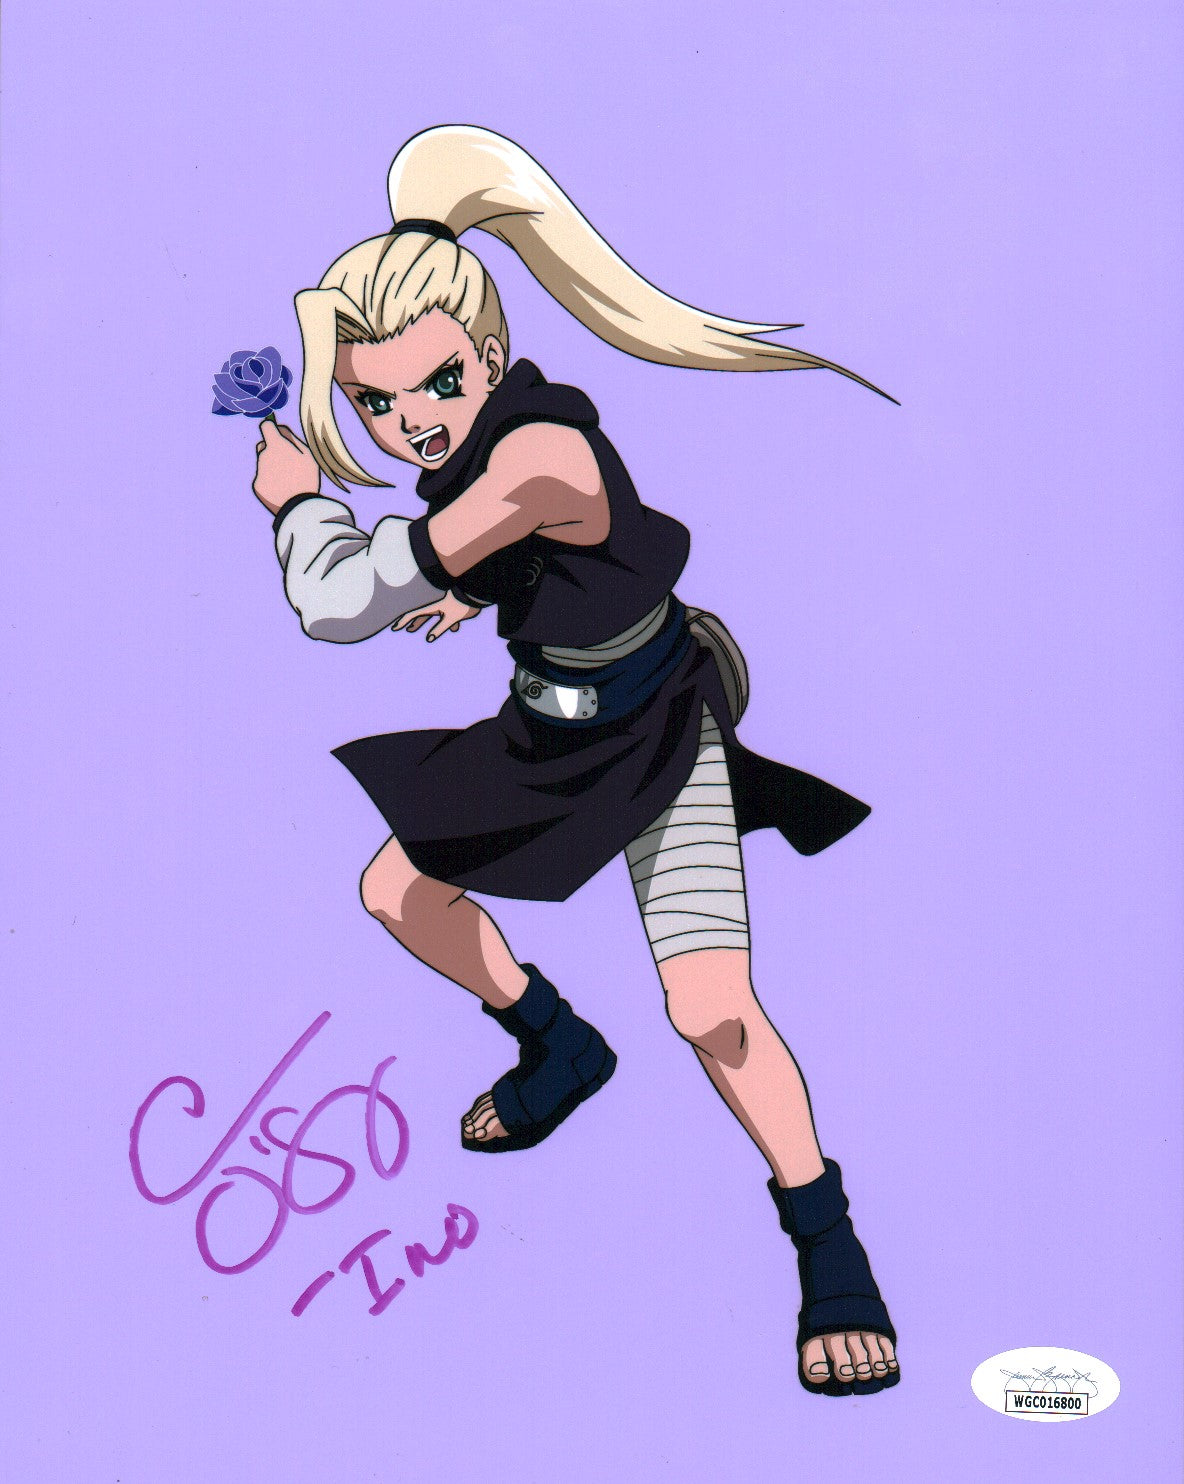 Colleen O'Shaughnessey Naruto 8x10 Photo Signed Autograph JSA COA Certified Auto GalaxyCon